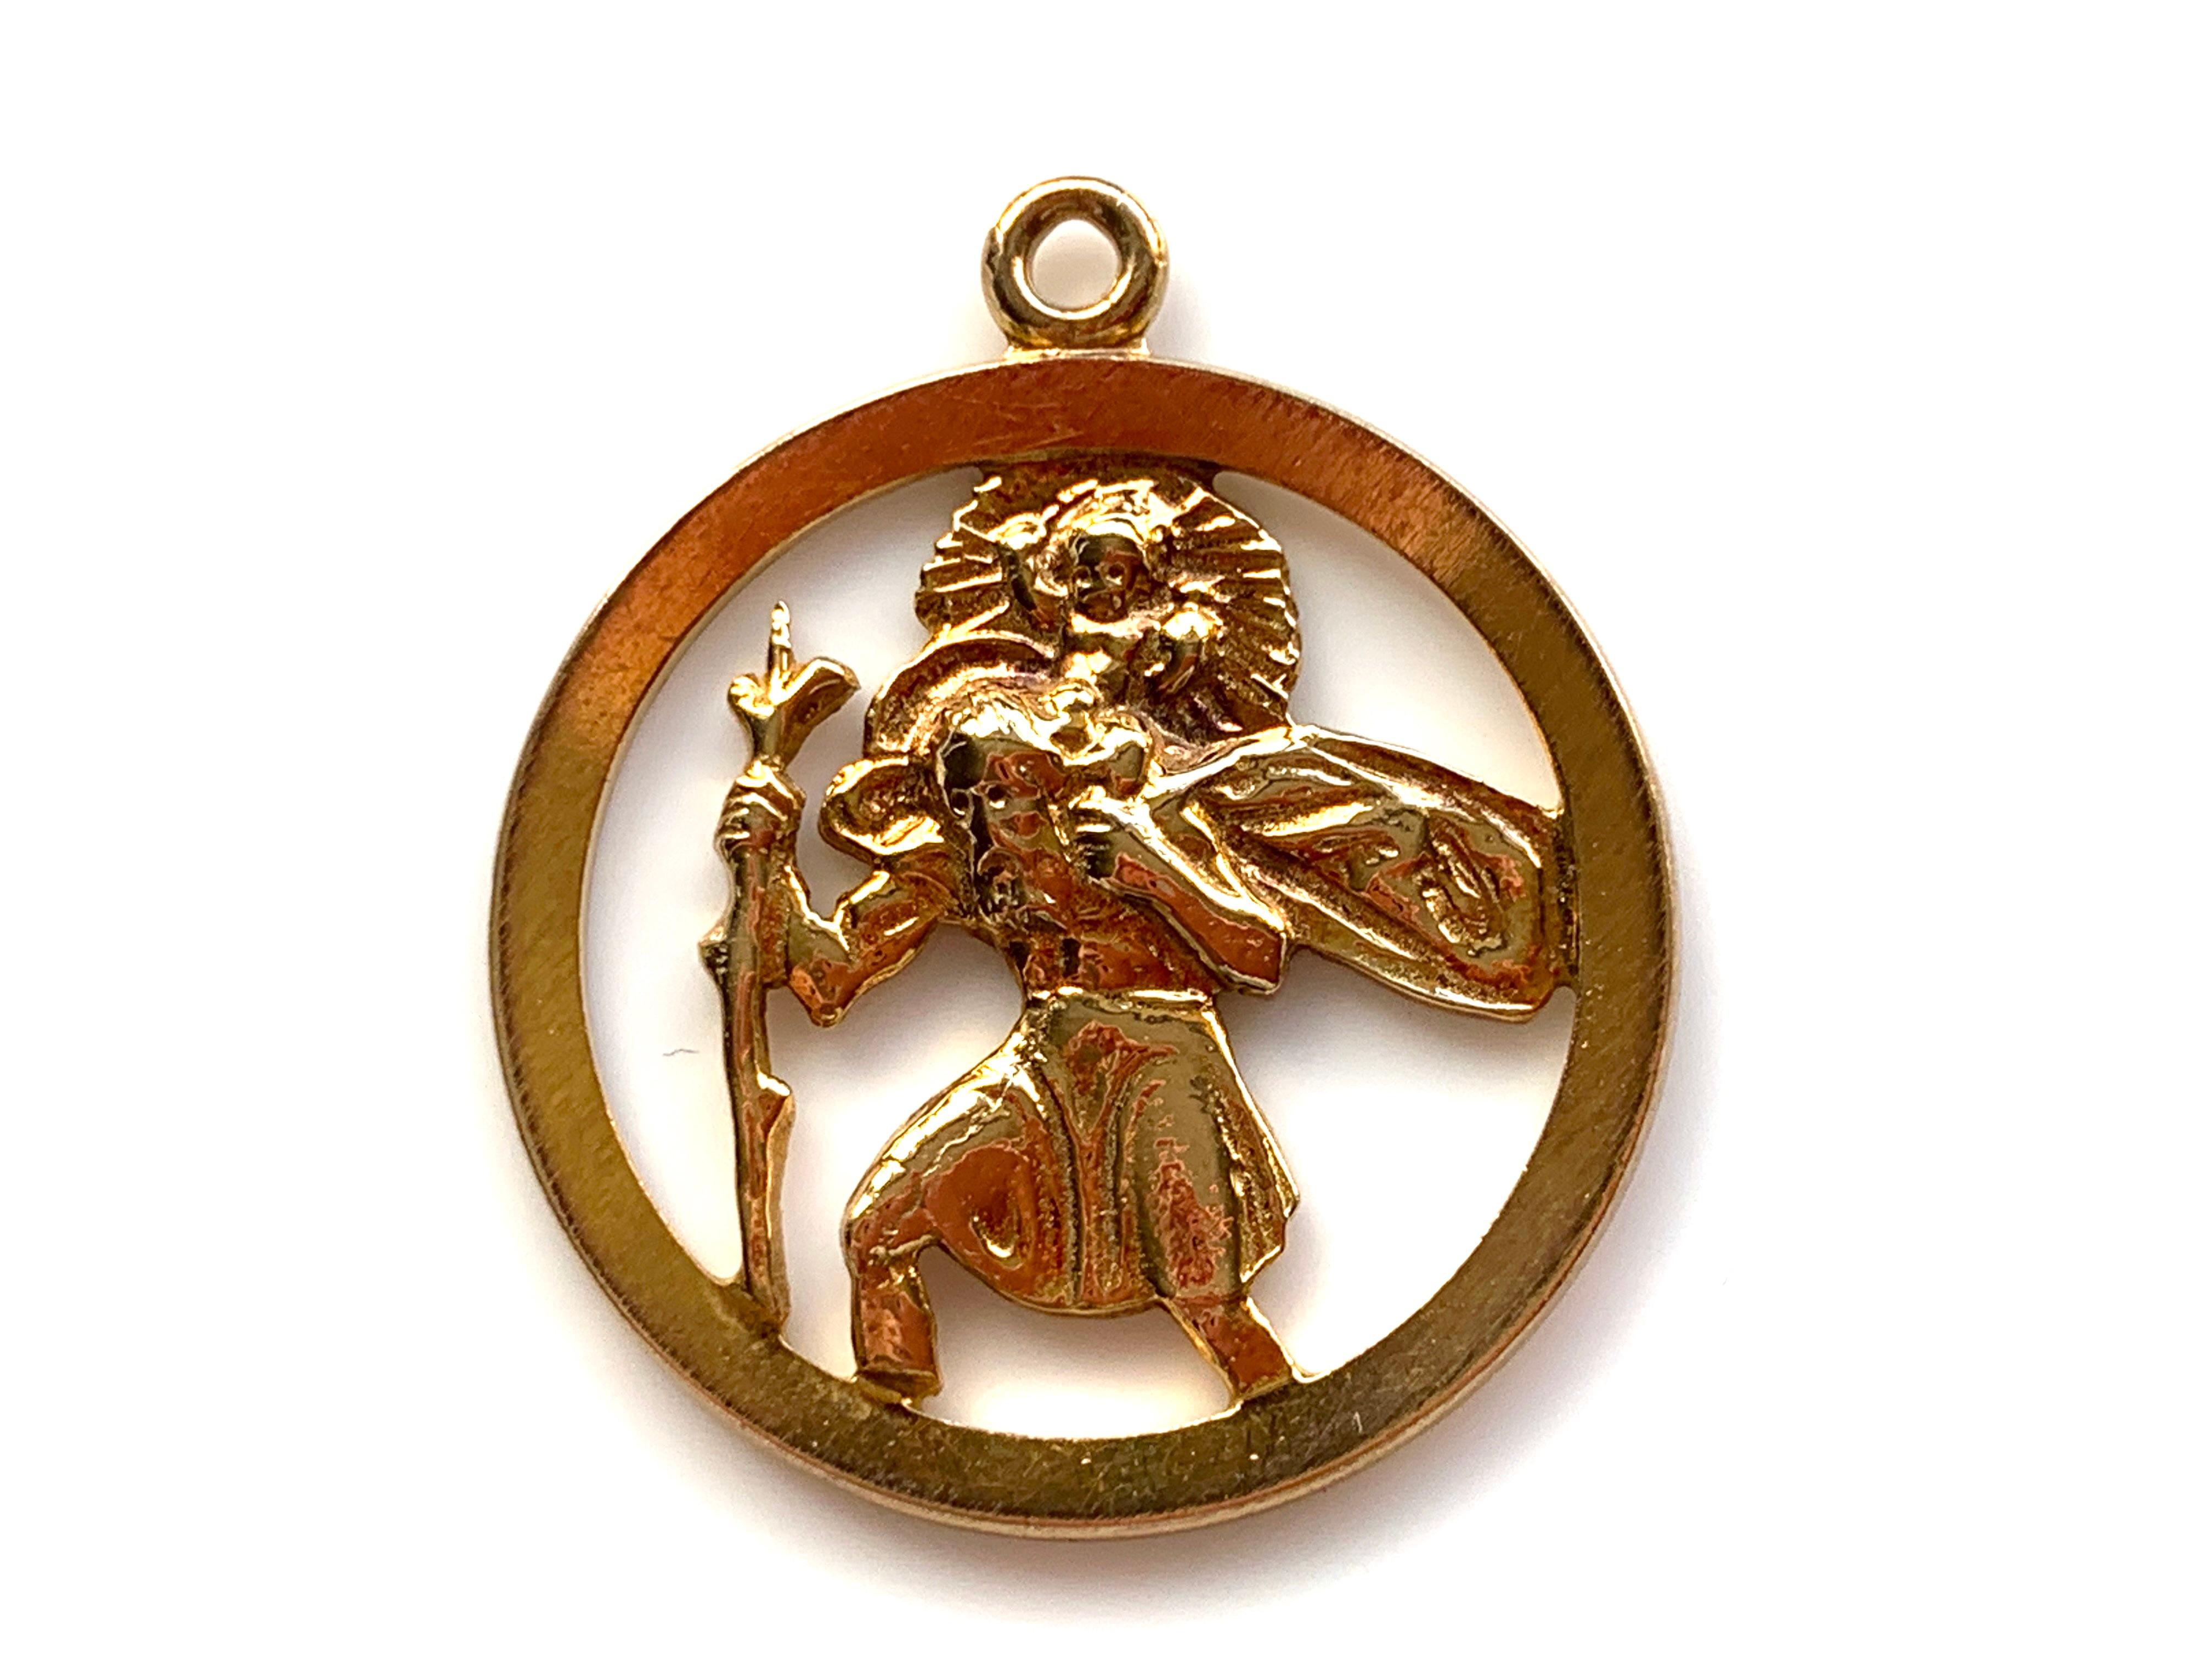 Beautiful Vintage 
9ct Gold St.Christopher 
quite Large
Fully Hallmarked
S&K goldsmiths - Moses & Salkind
Mid Century